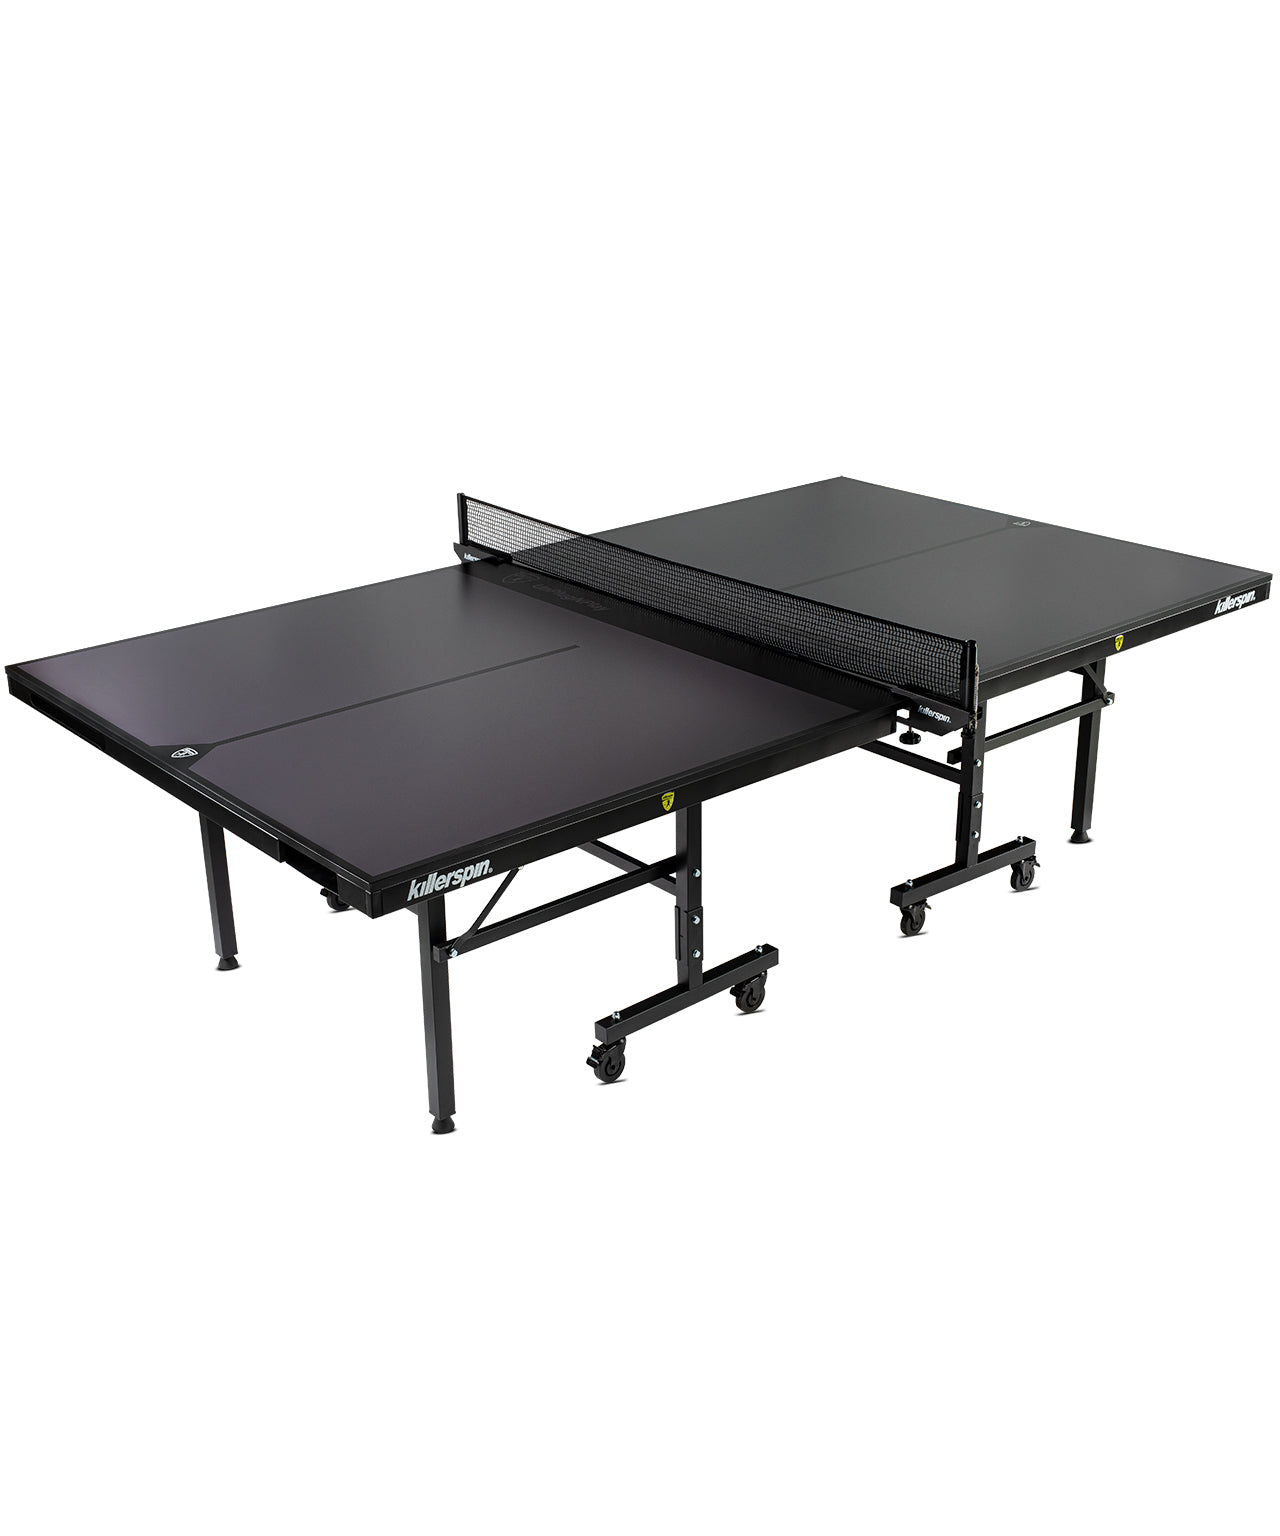 Killerspin Indoor Ping Pong Table UnPlugNPlay415 X Mega DeepChocolate Black frame model 2020 - side view